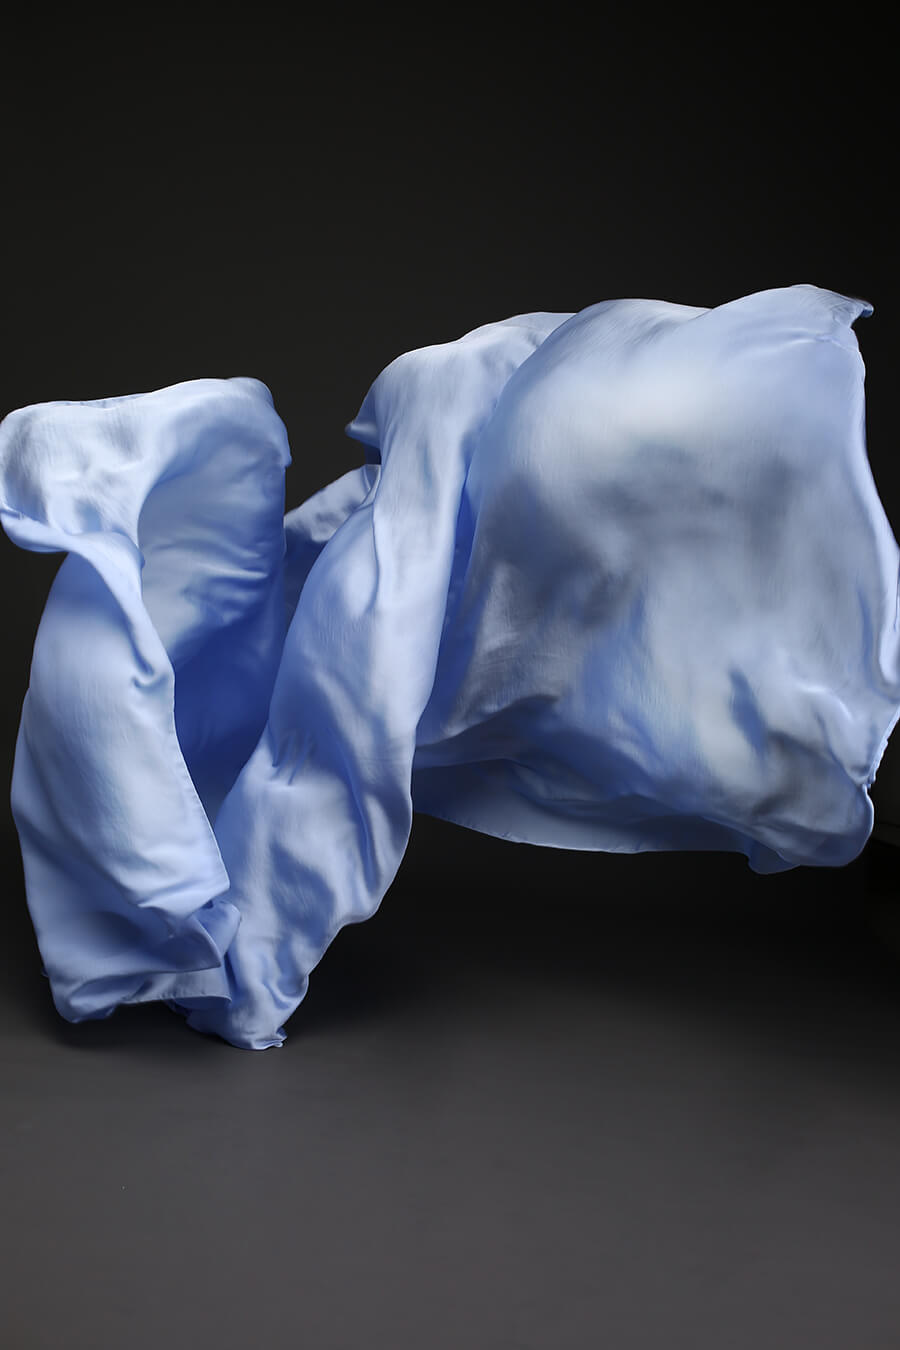 Photo taken on a studio and shows only the mii-estilo silky scarf in light blue color. The photo shows the scarf flying in front of the camera with playful movements.